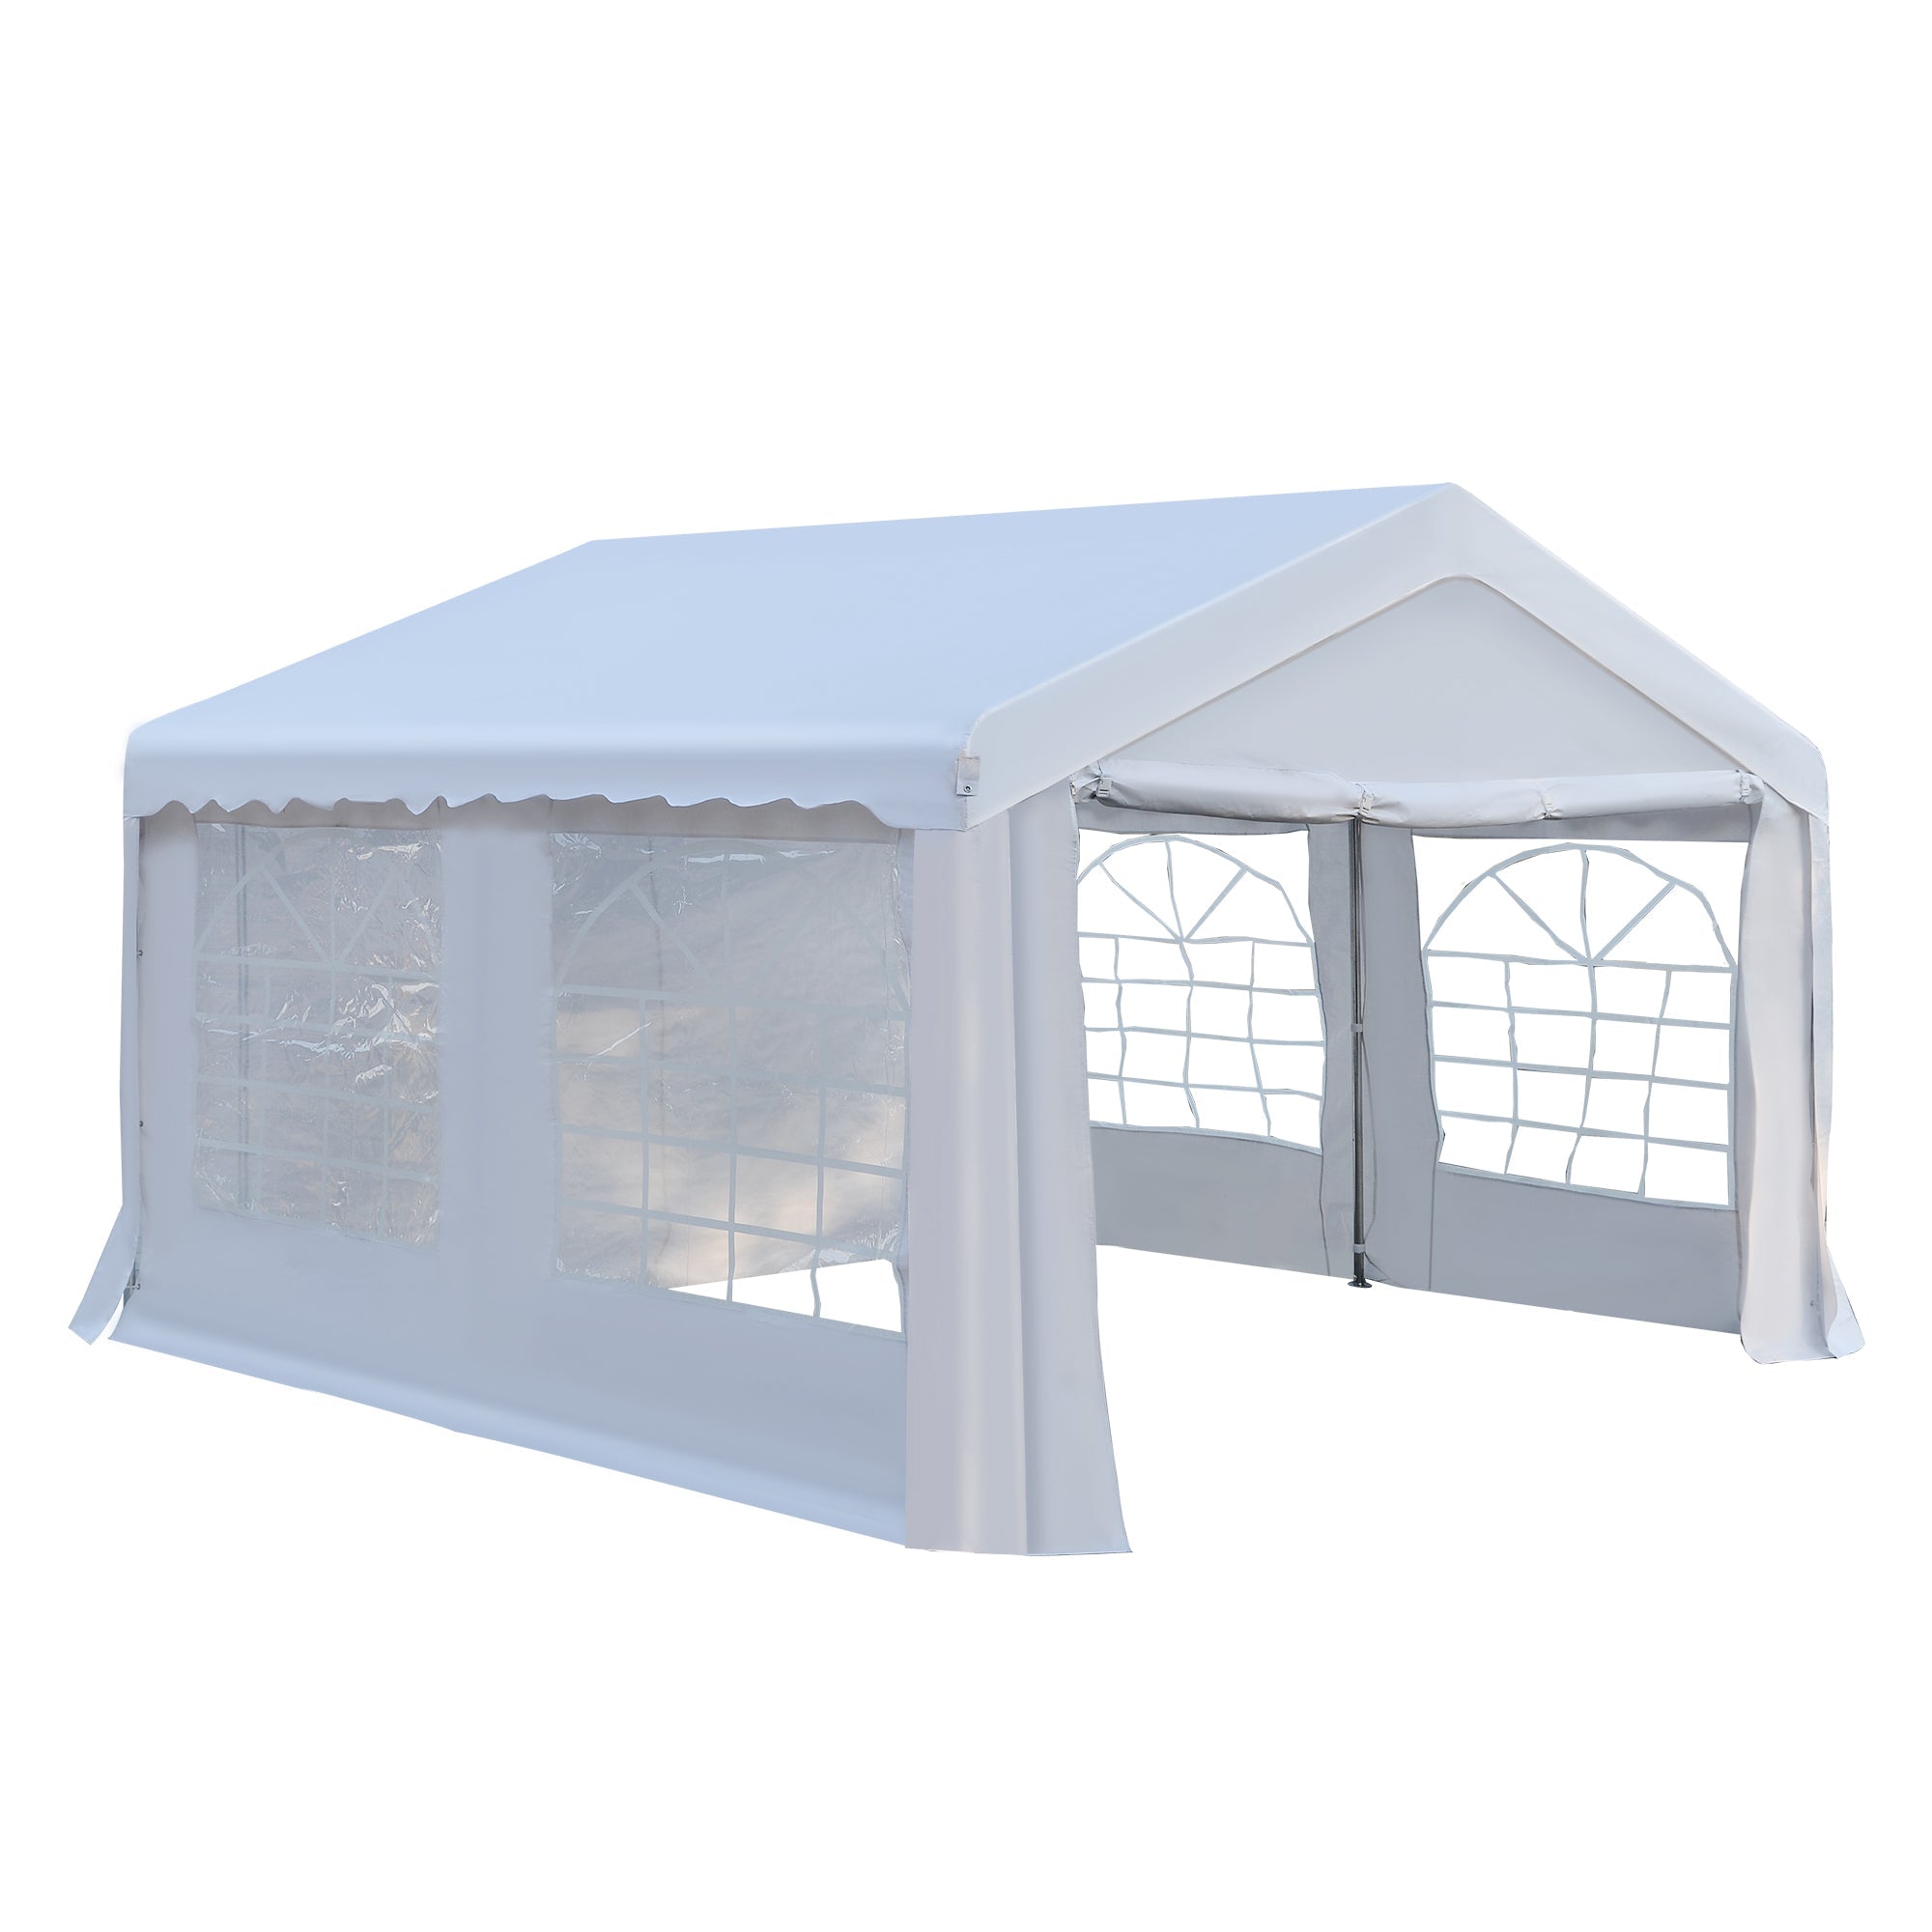 4m x 4 m Party Tents Portable Carport Shelter with Removable Sidewalls & Double Doors, Heavy Duty Party Tent Car Canopy-0